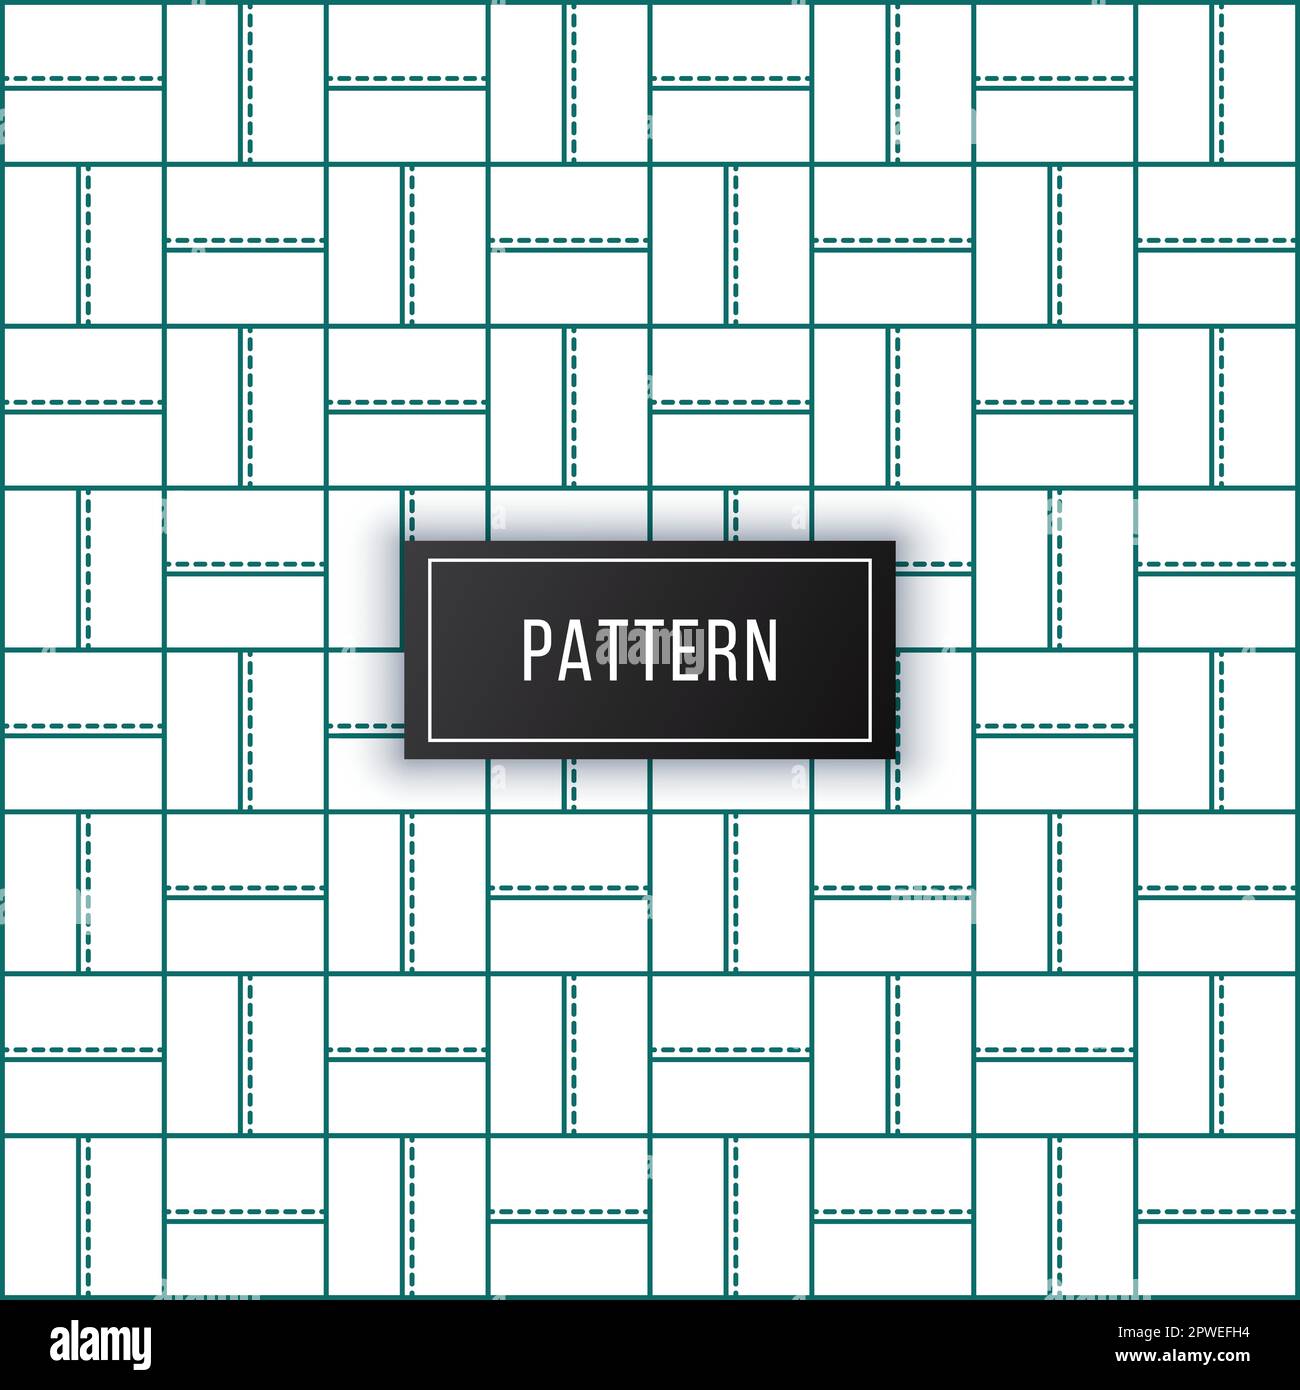 Black and white Brick basket weave pattern background Stock Vector